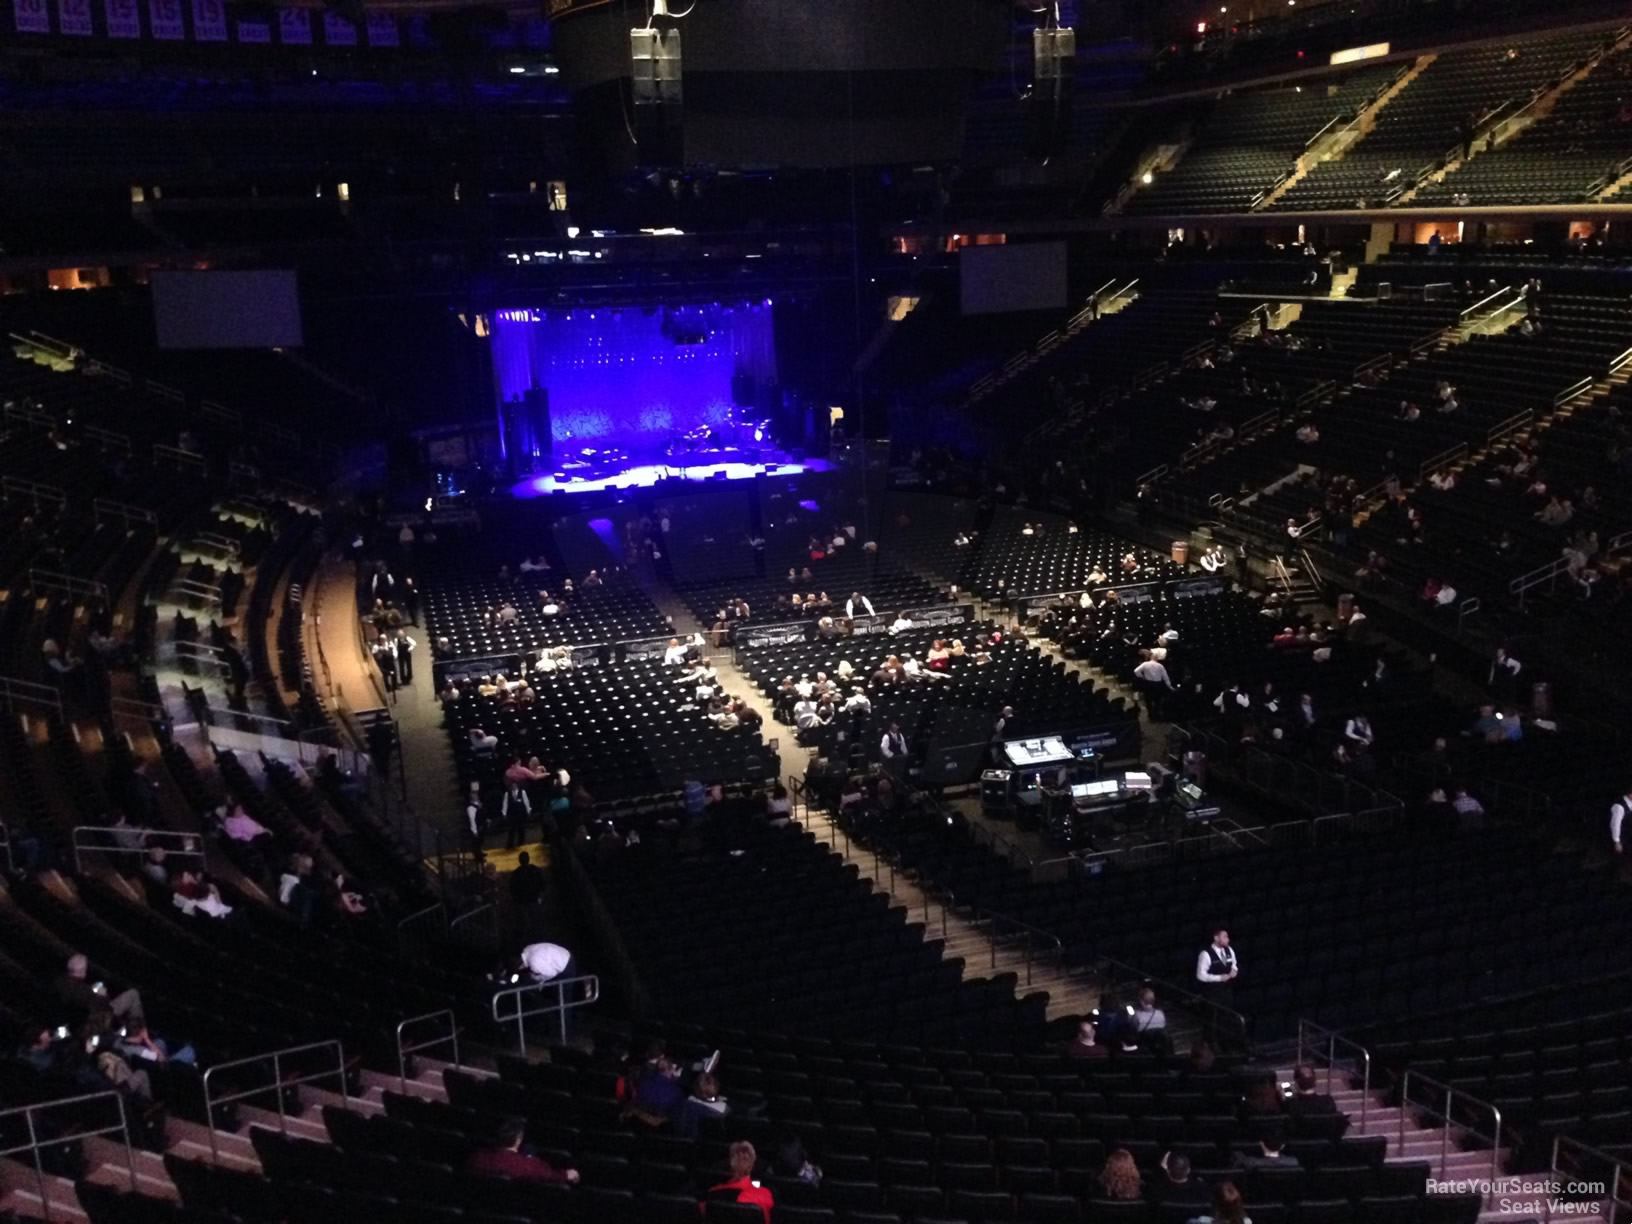 section 203, row 2 seat view  for concert - madison square garden